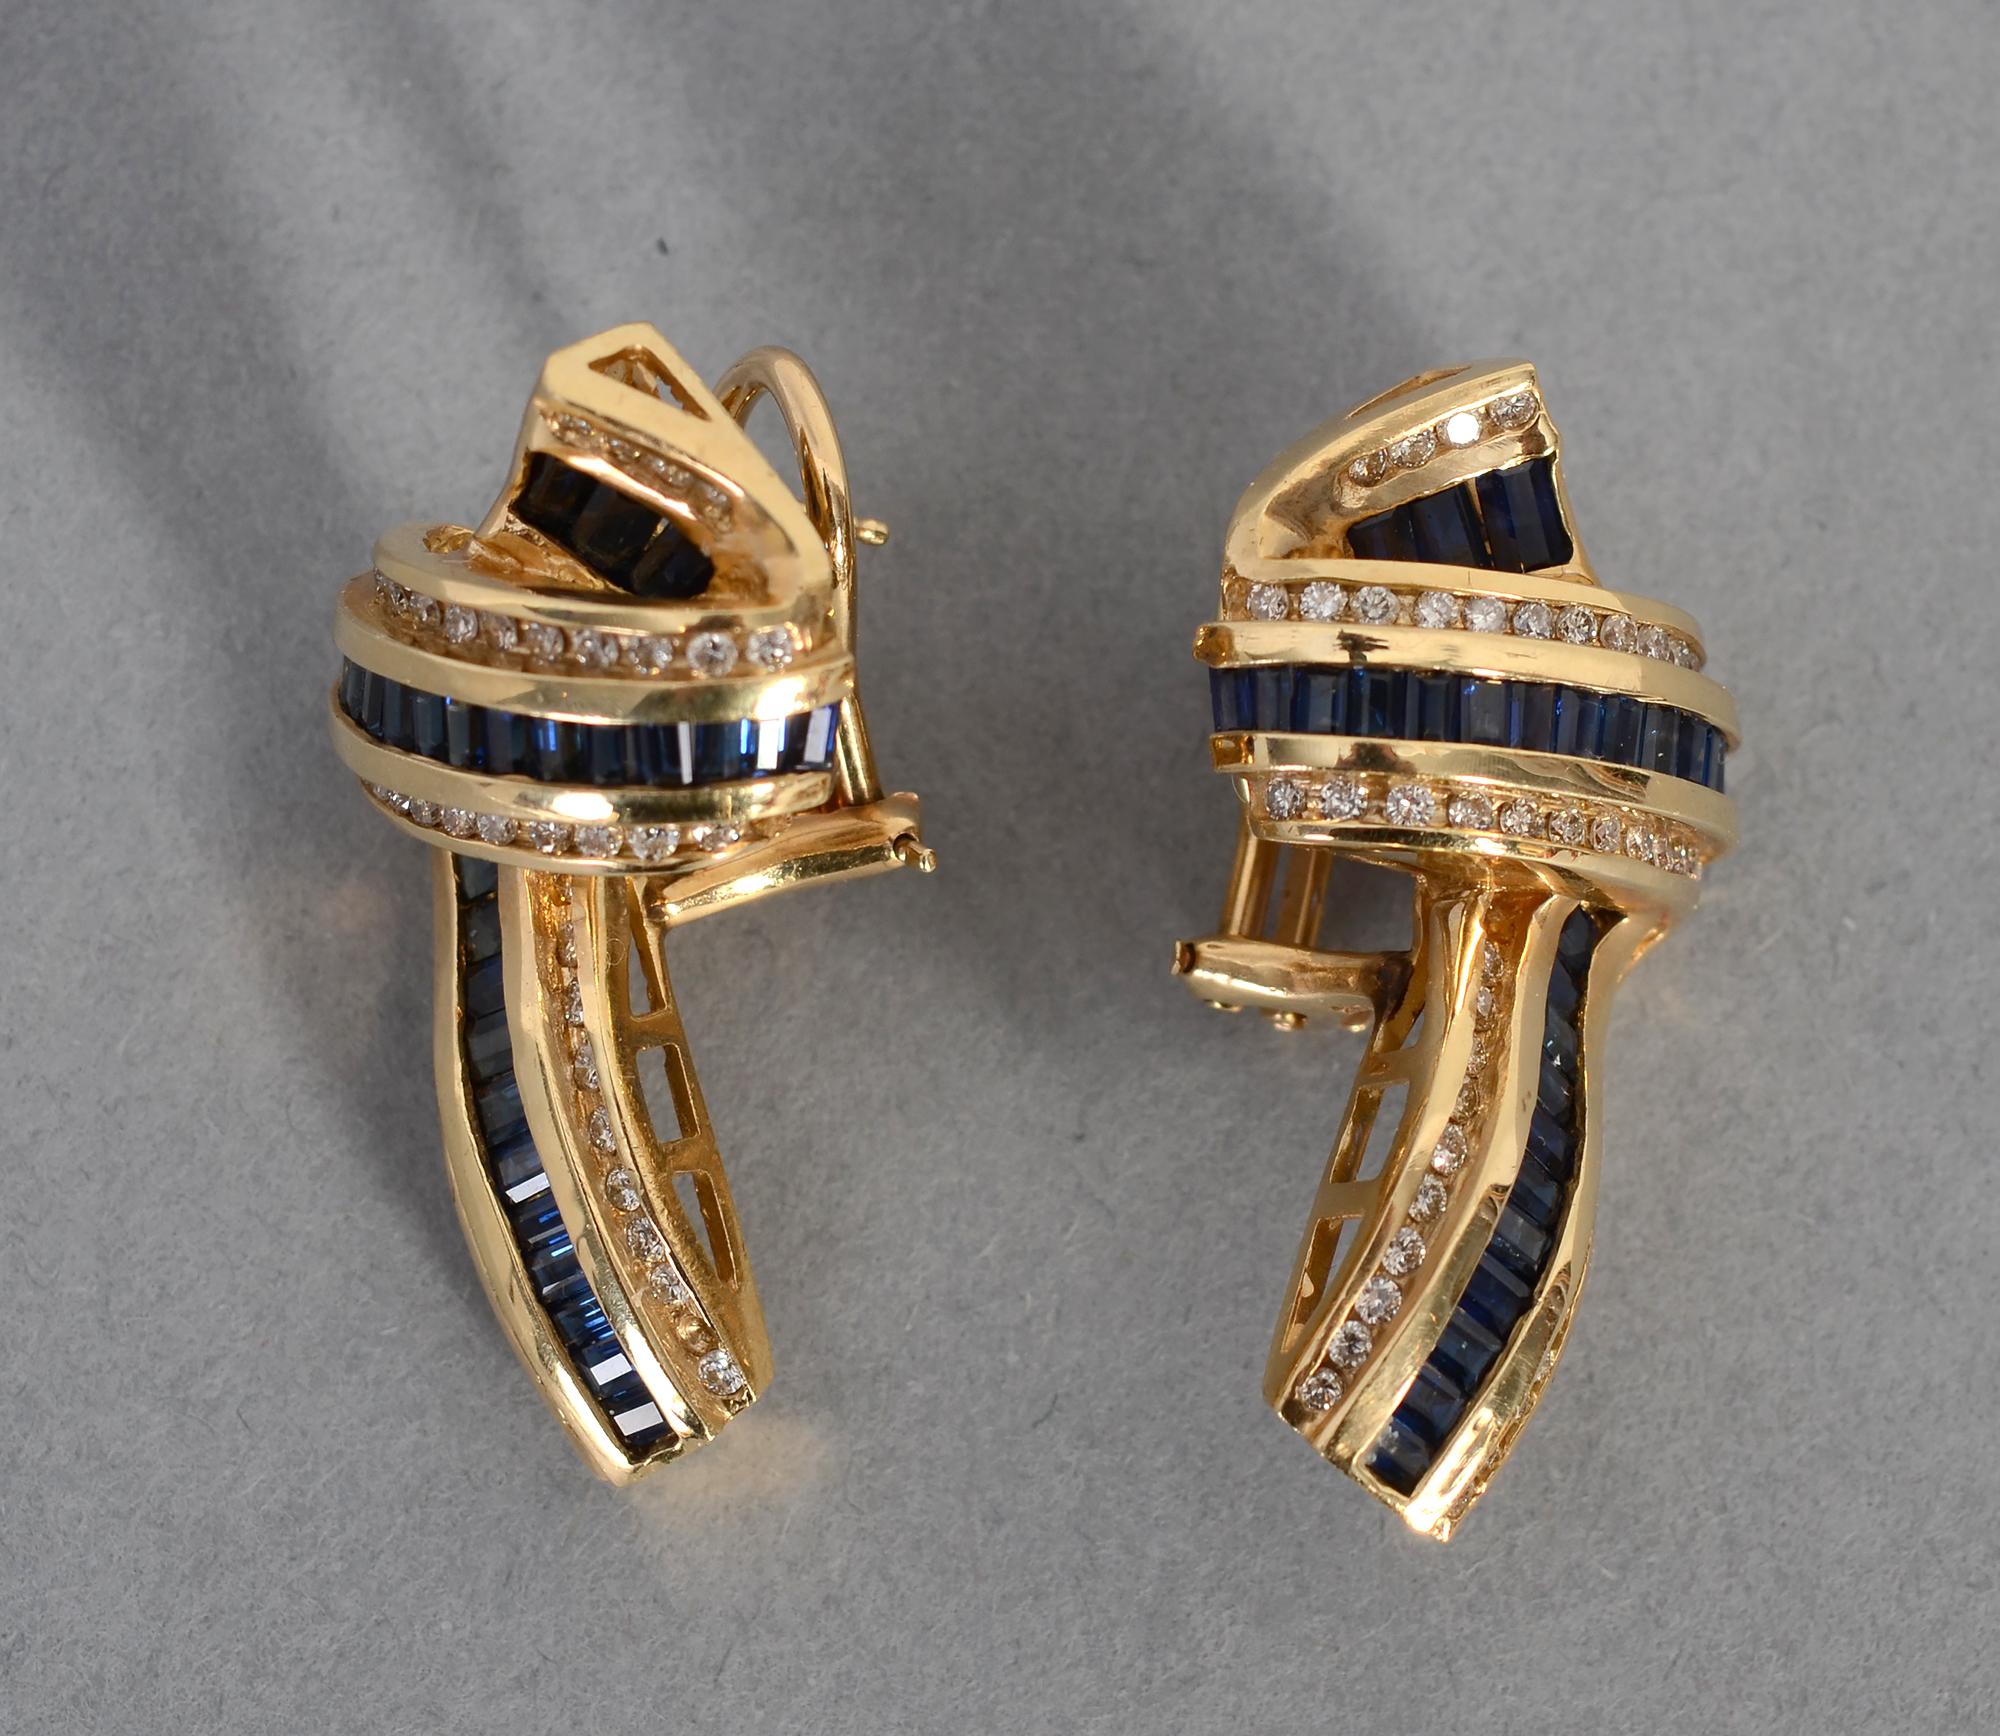 Sapphire and diamond earrings set in 14 karat gold with the undulating look of a ribbon. They have 110 round diamonds with a total weight of approximately 1 carat. Backs are clips and posts. The earrings are very much in the style of Charles Krypell